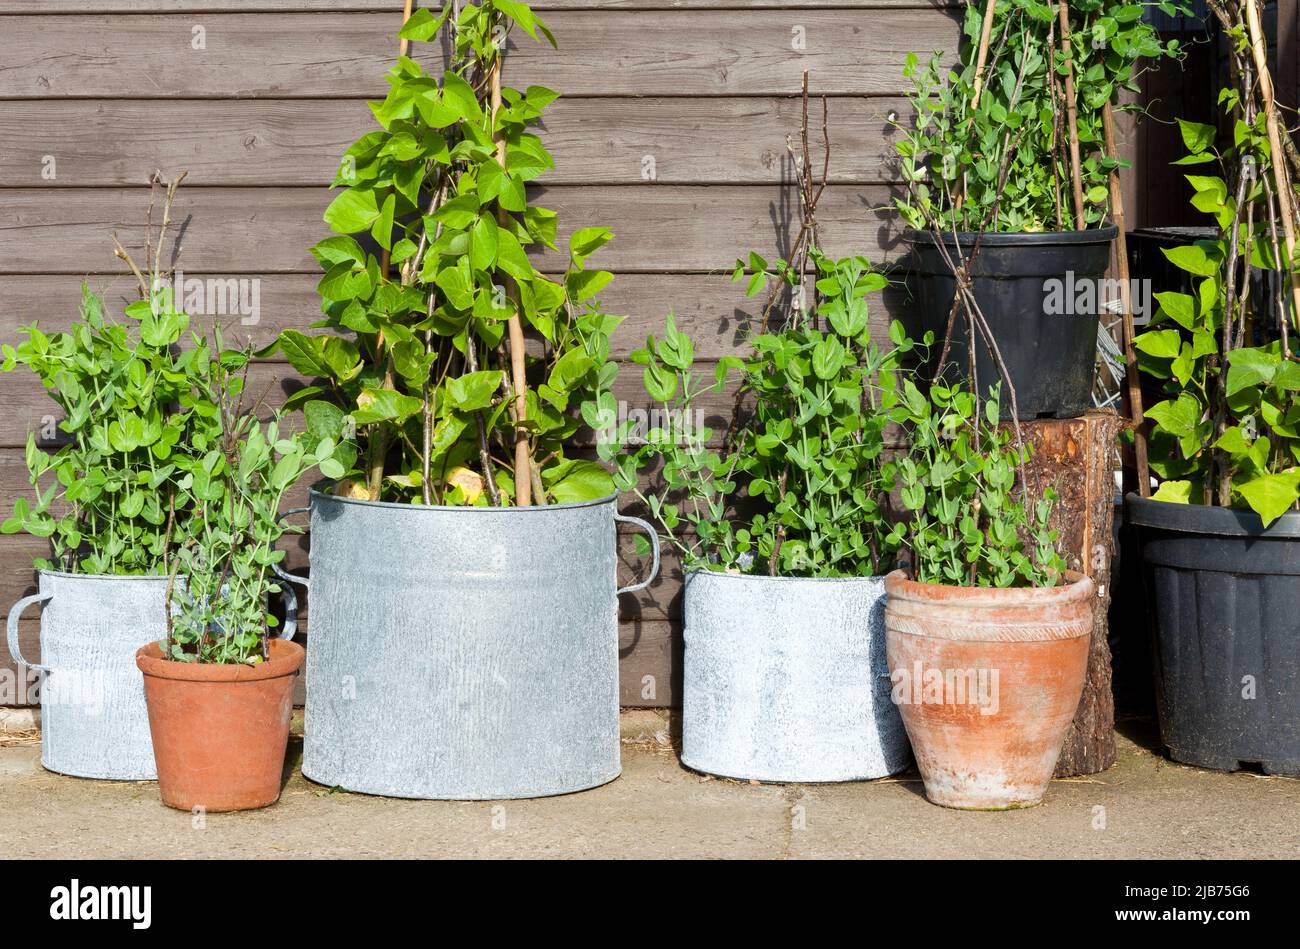 Edible peas and runner beans growing in pots Stock Photo